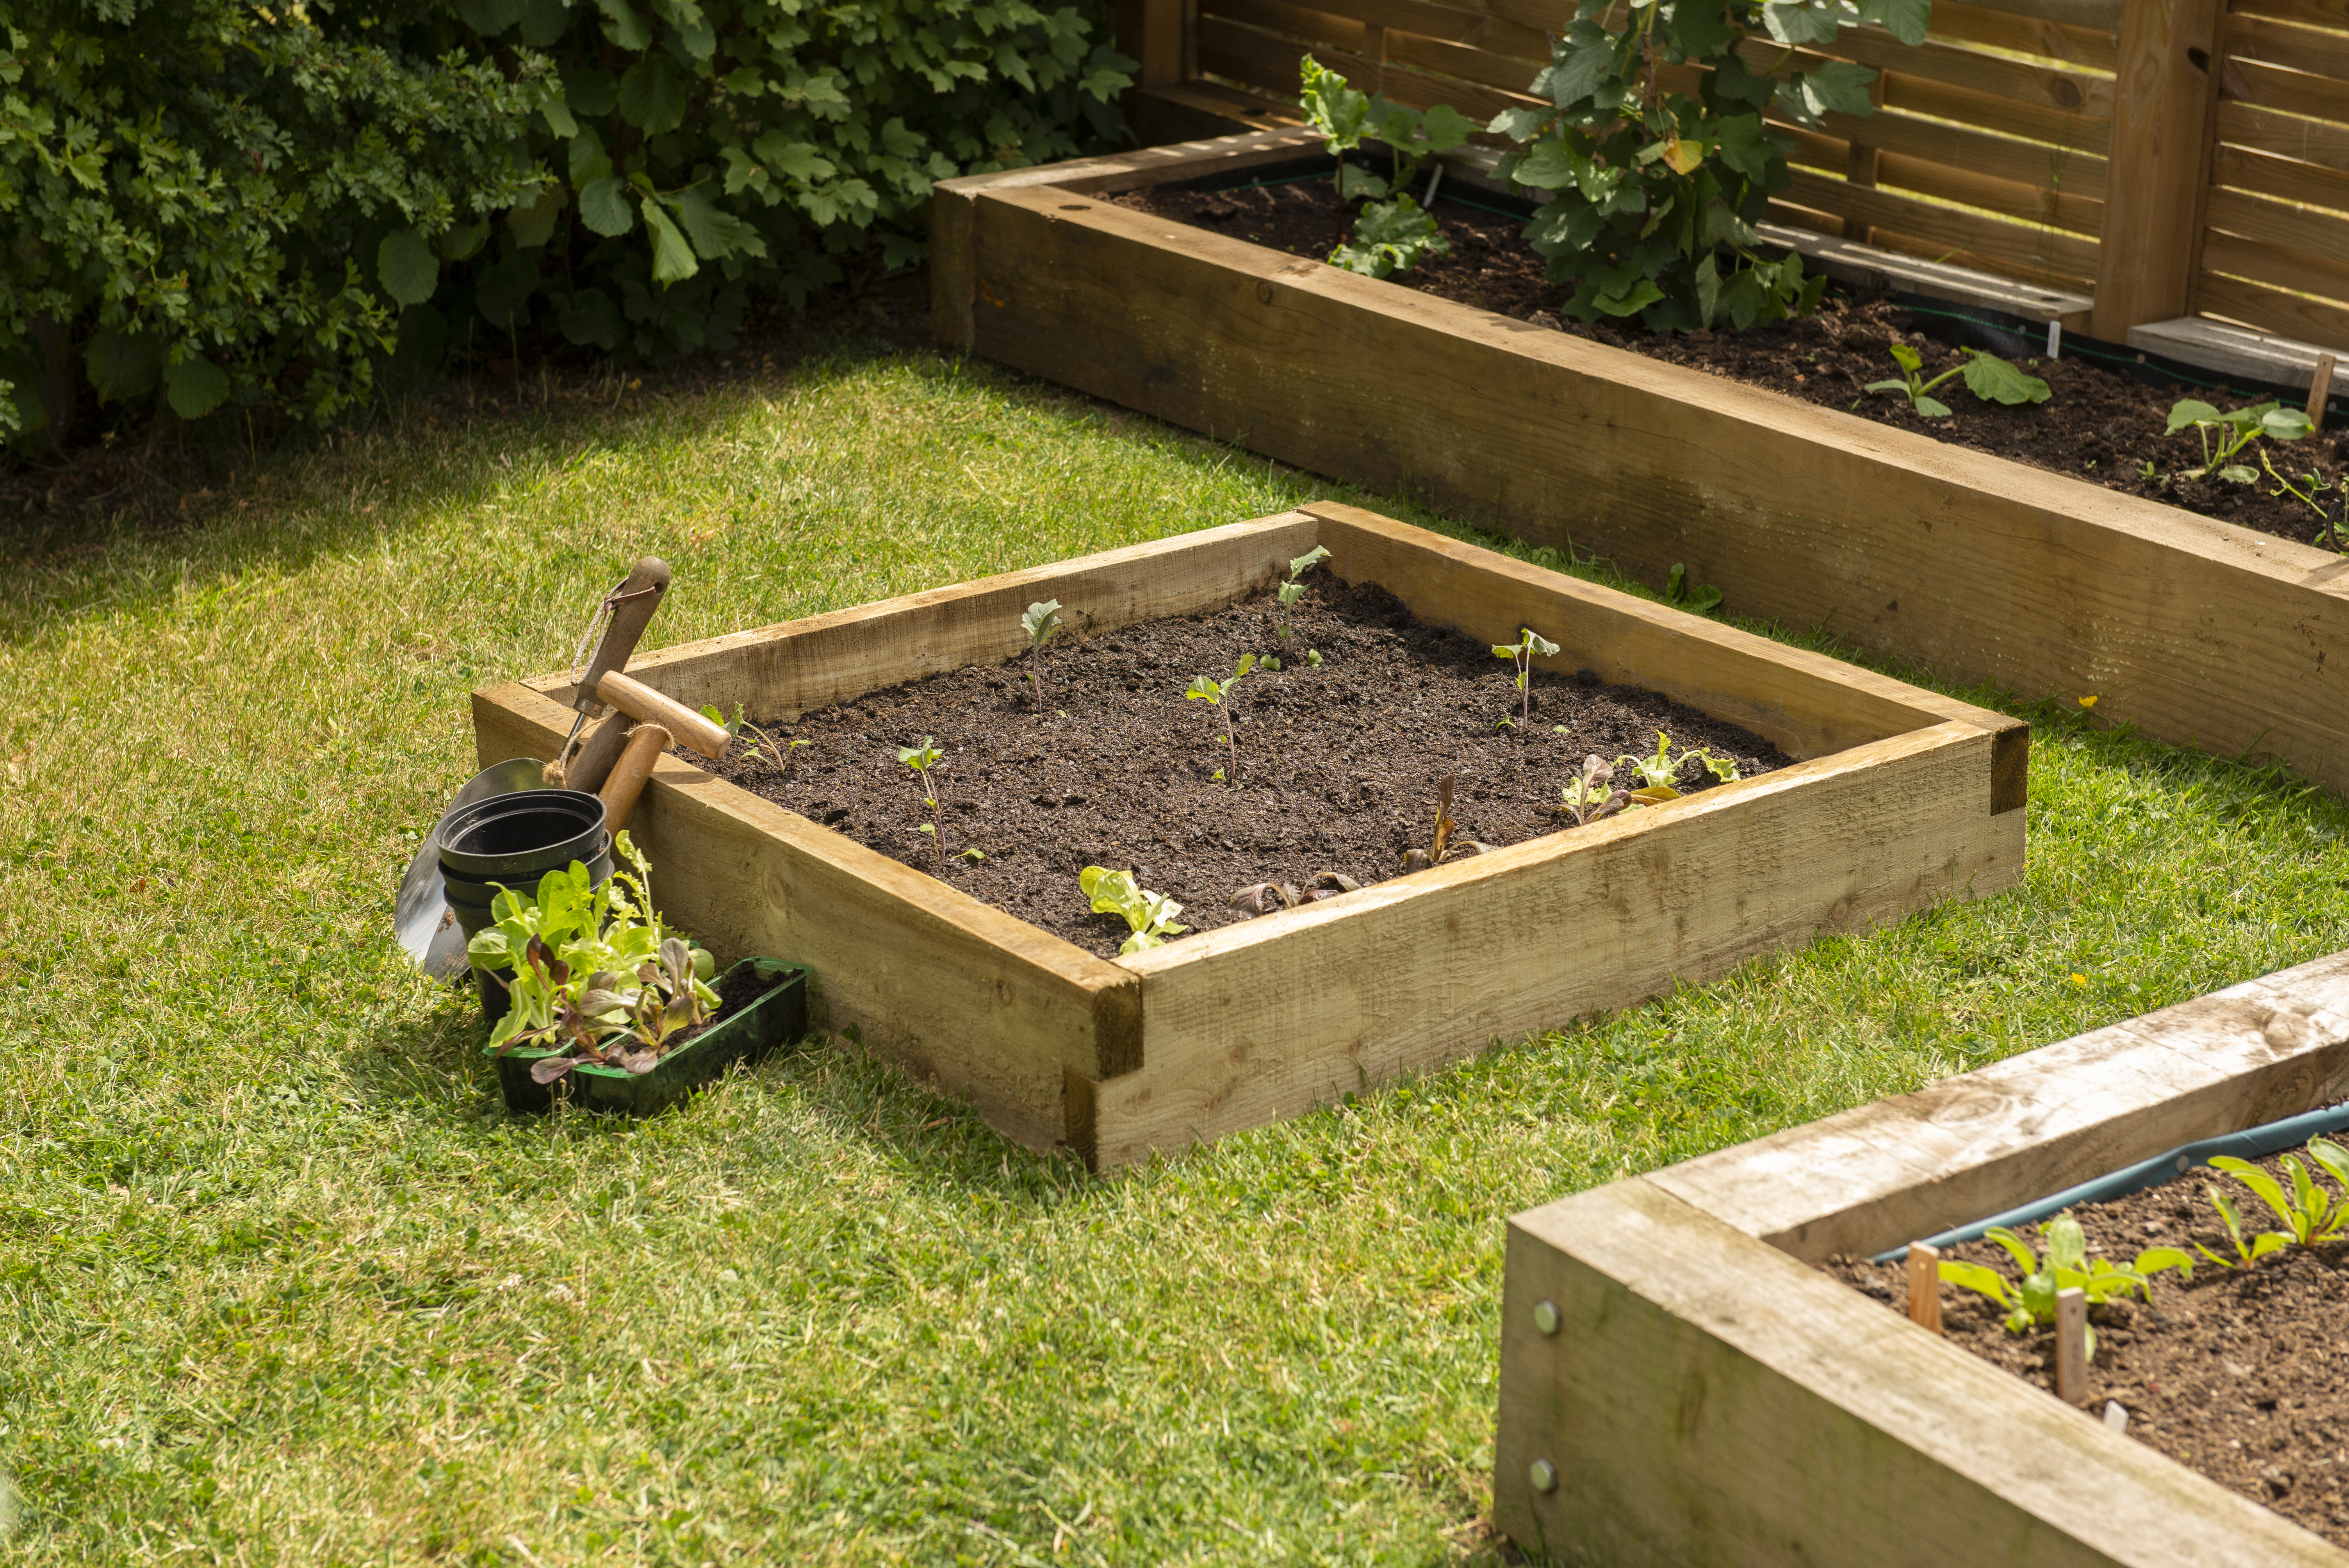  Forest Garden Caledonian Compact raised Bed 90 x 90